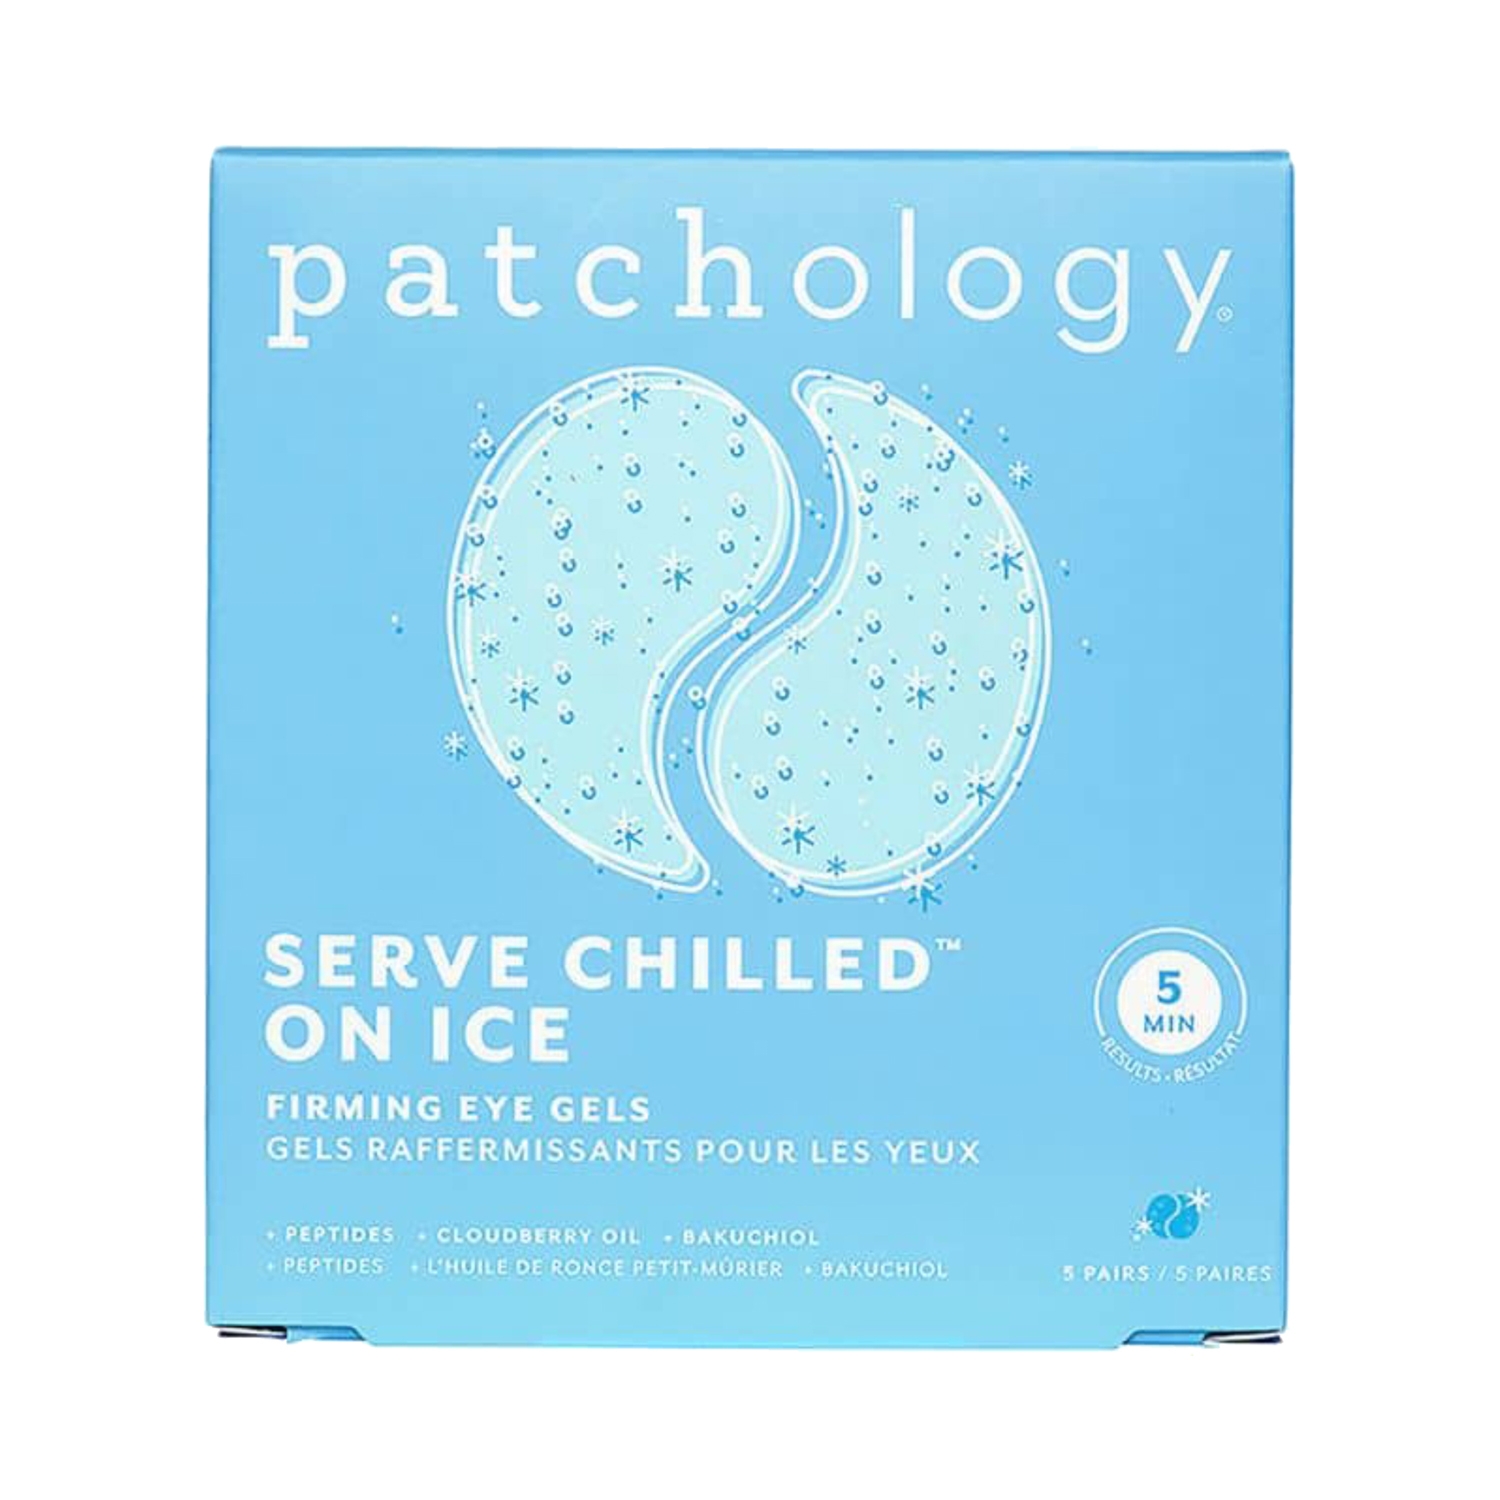 Patchology Serve Chilled On Ice Firming Eye Gel Patches (5Pcs)